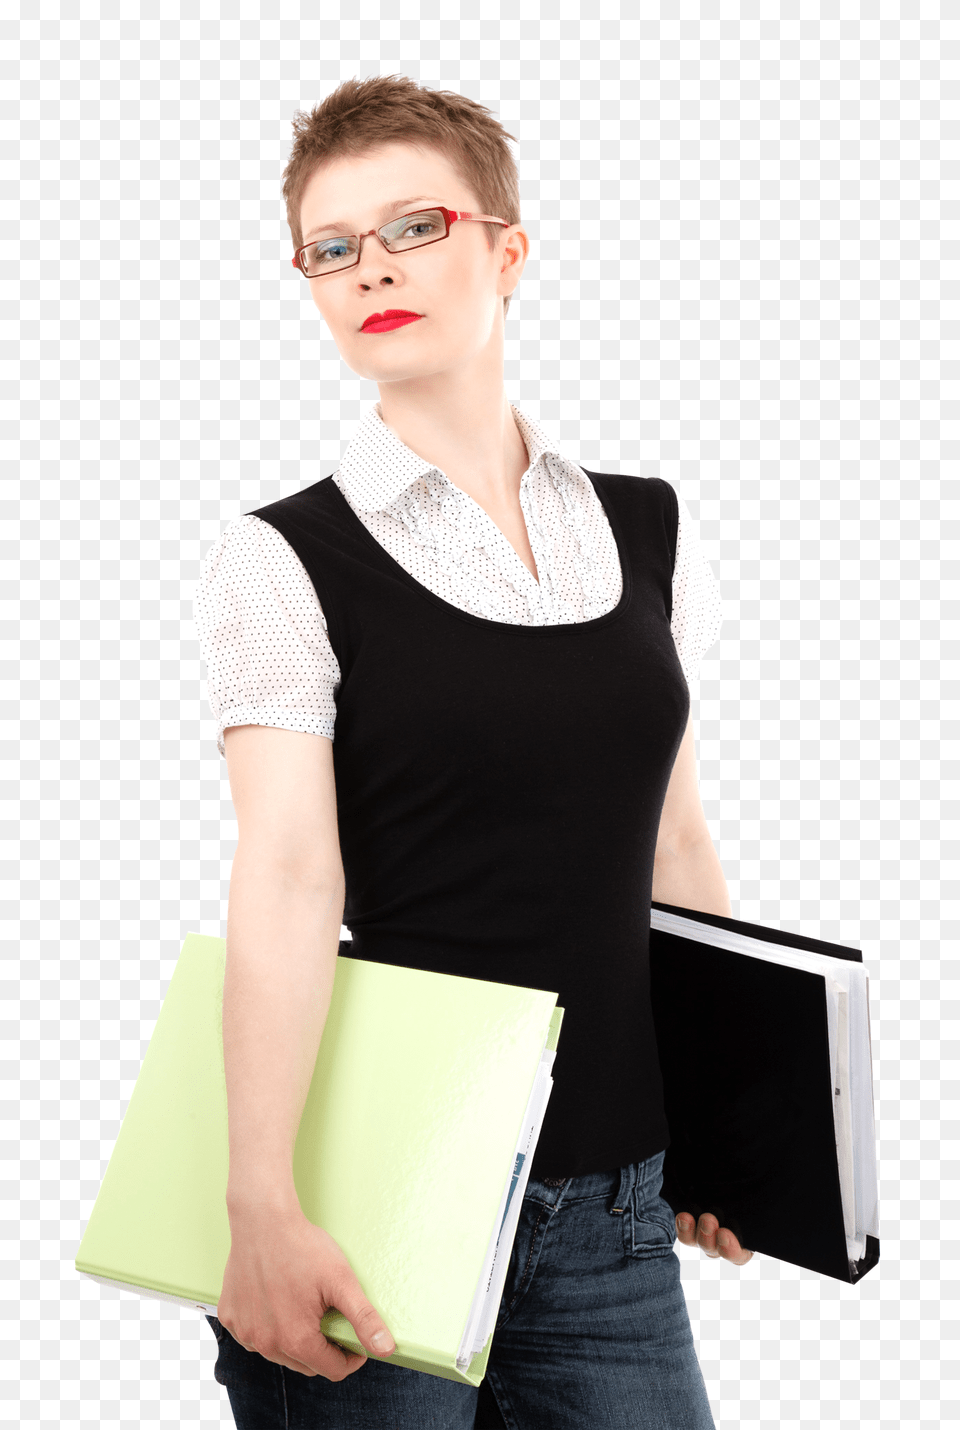 Pngpix Com Business Woman Holding Files In Her Hands, Blouse, Clothing, Accessories, Person Free Png Download